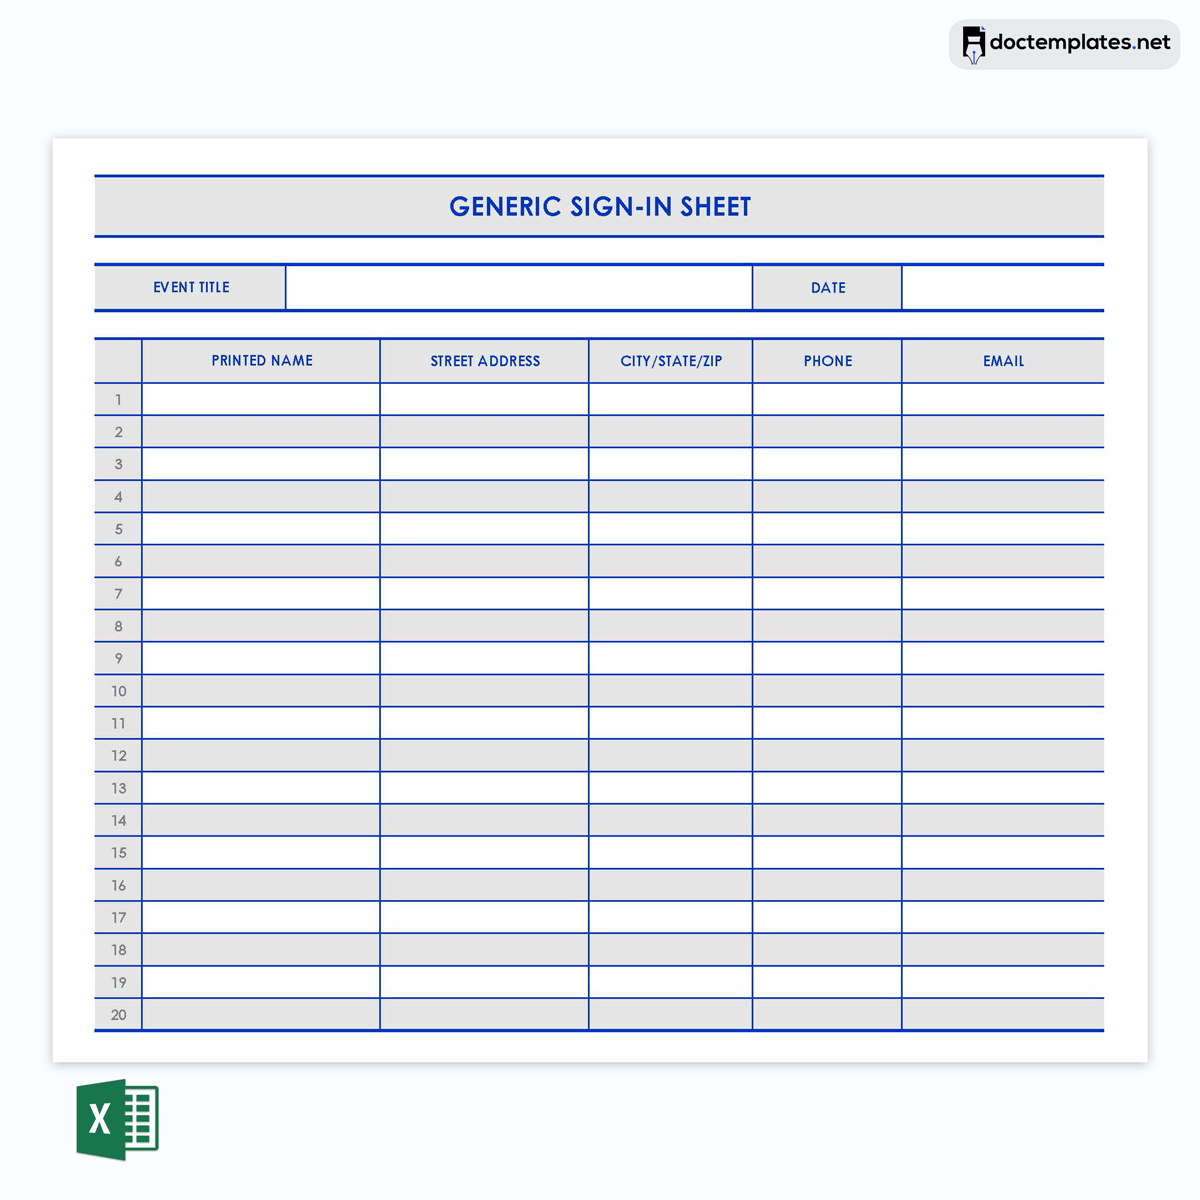 Generic sign-in sheet